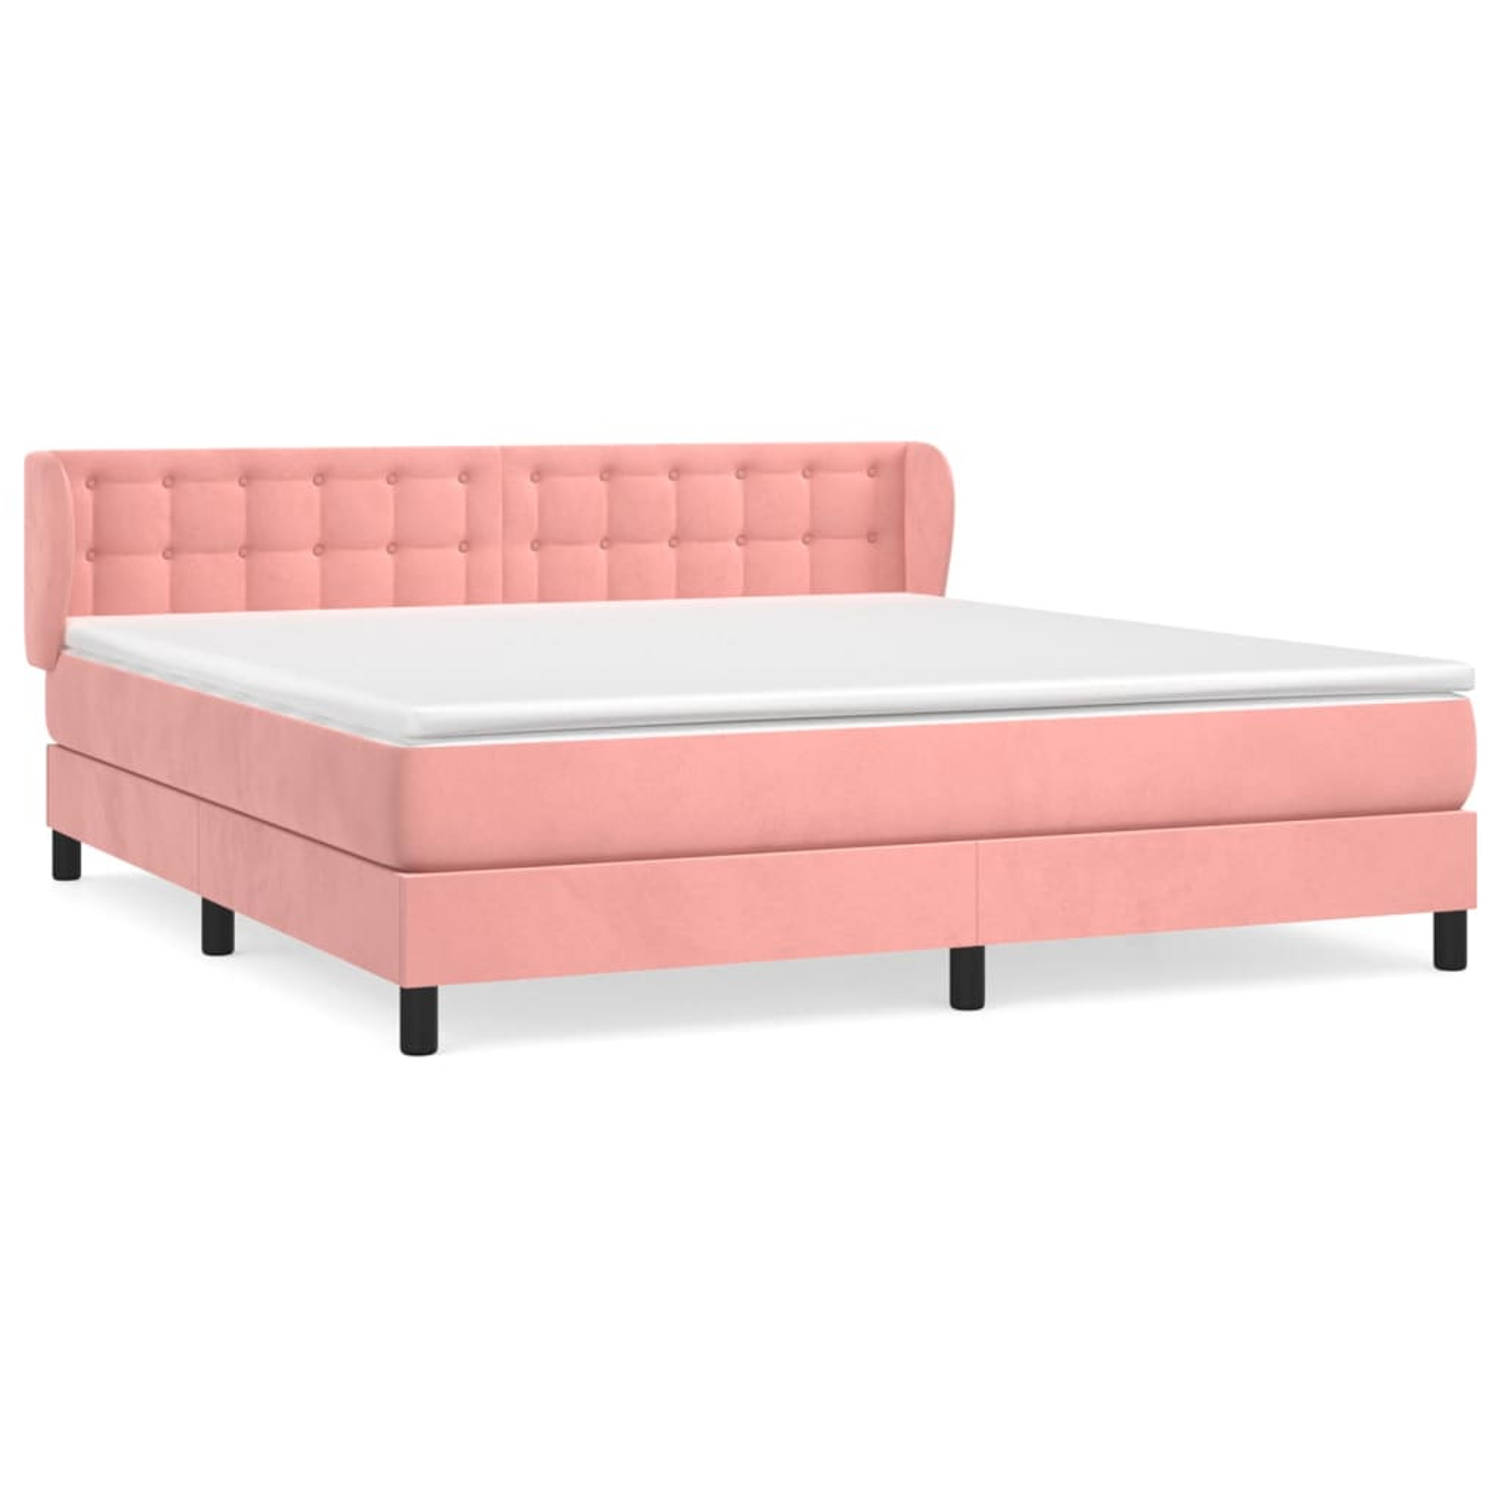 The Living Store Boxspringbed - Fluweel - 203 x 183 x 78/88 cm - Roze